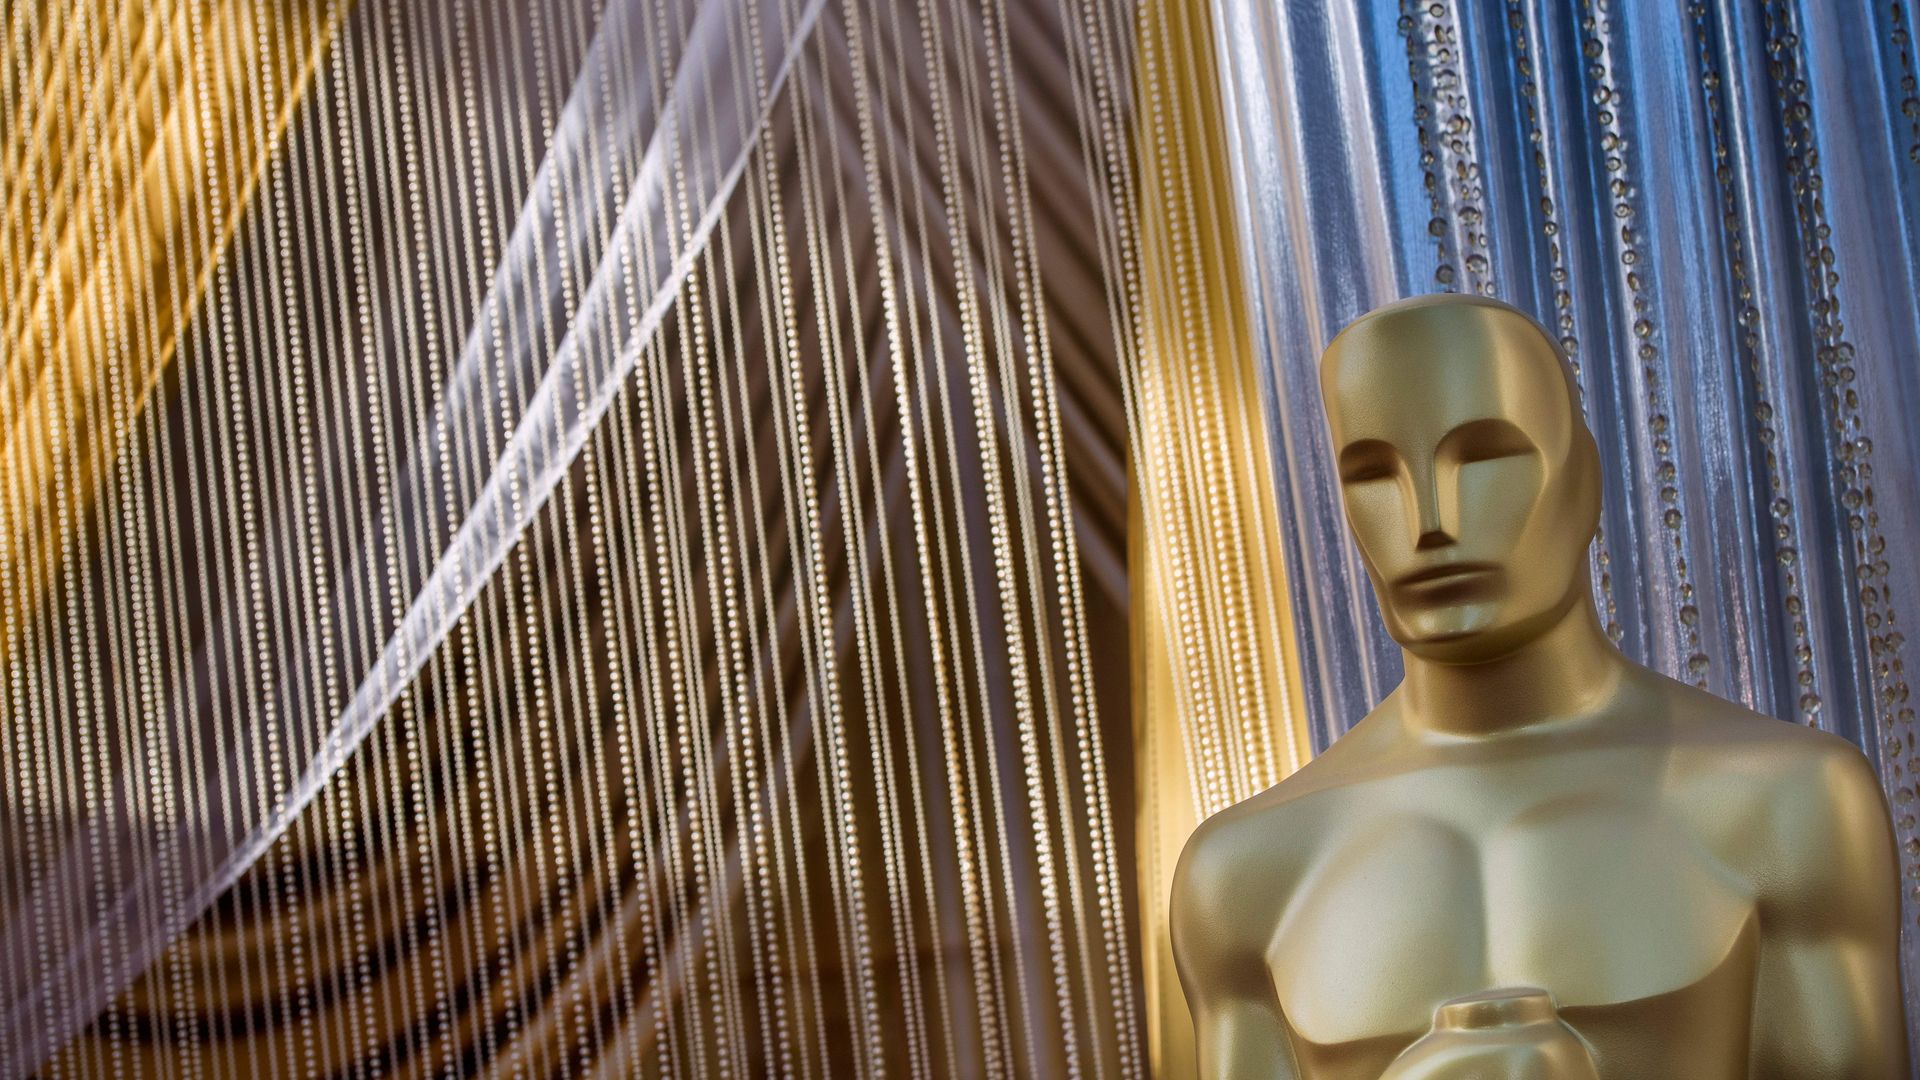 An Oscars statue is displayed on the red carpet area on the eve of the 92nd Oscars ceremony.